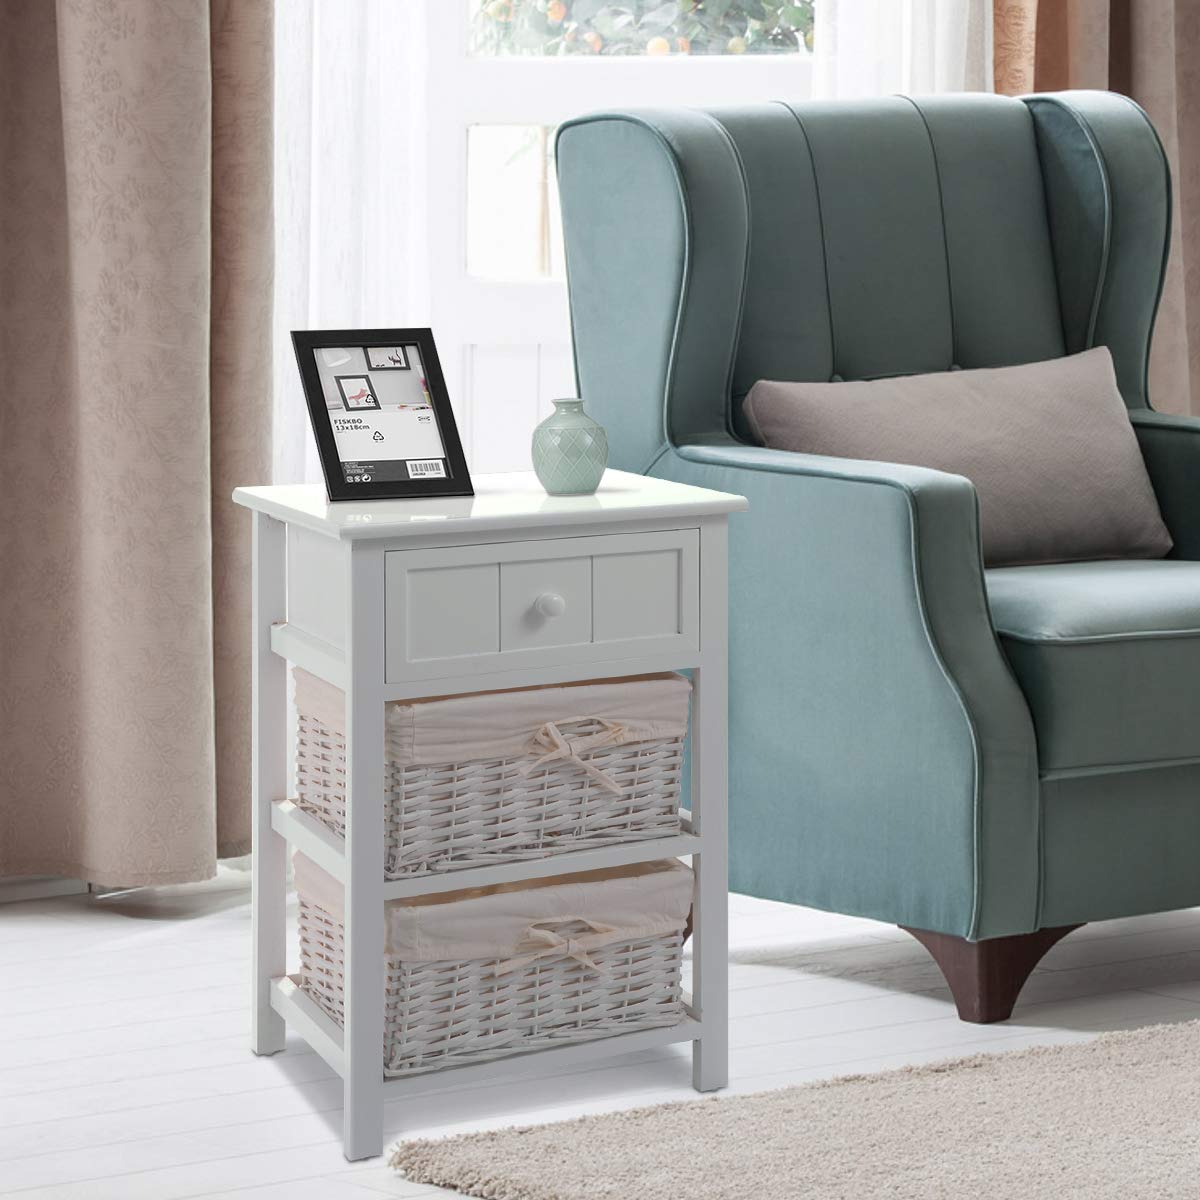 Giantex Nightstand with Drawers Wooden